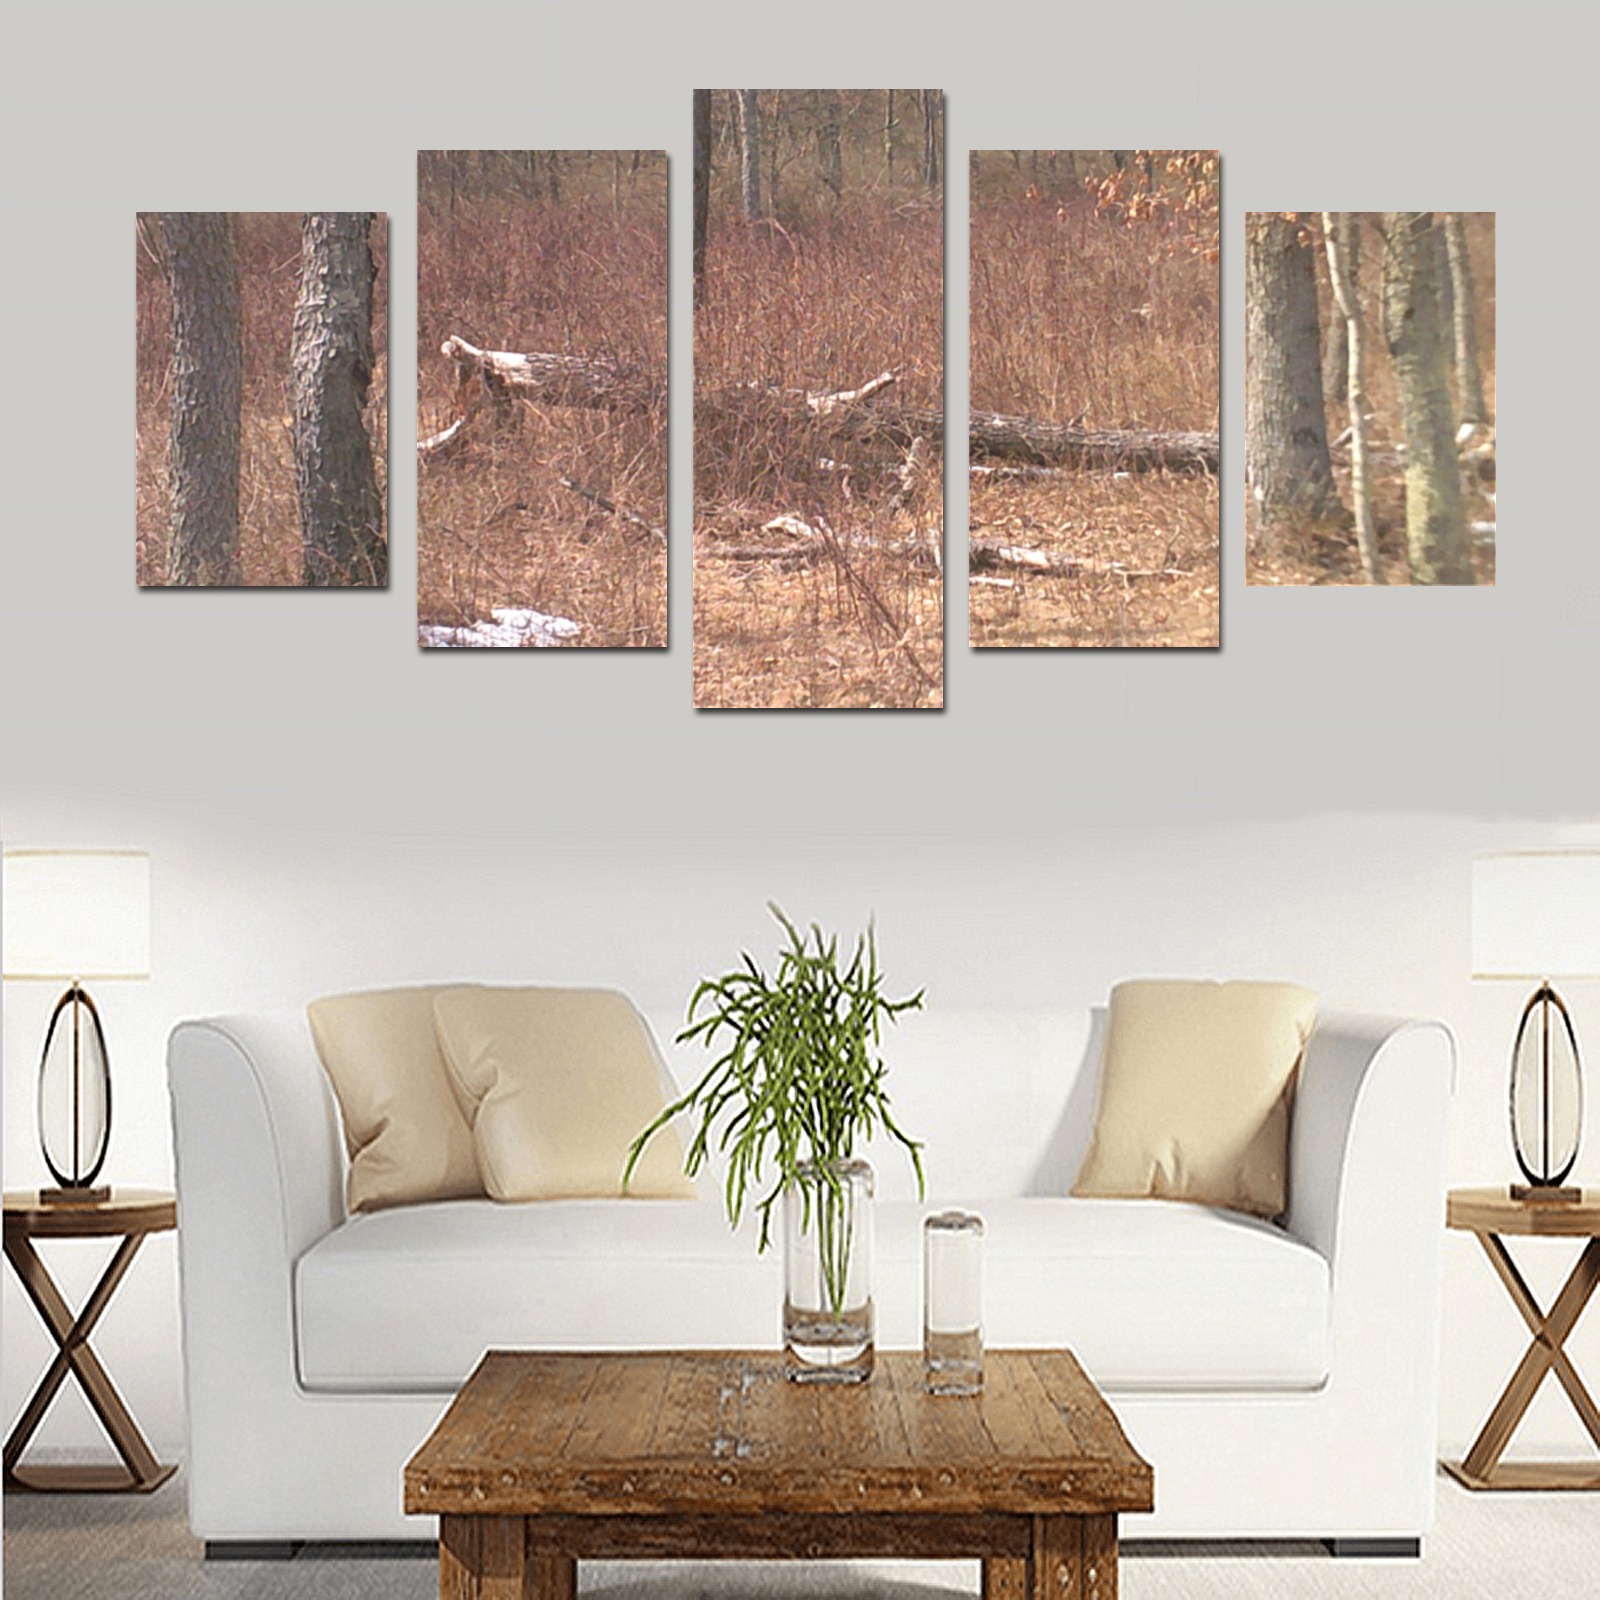 Falling tree in the woods Canvas Print Sets D (No Frame)